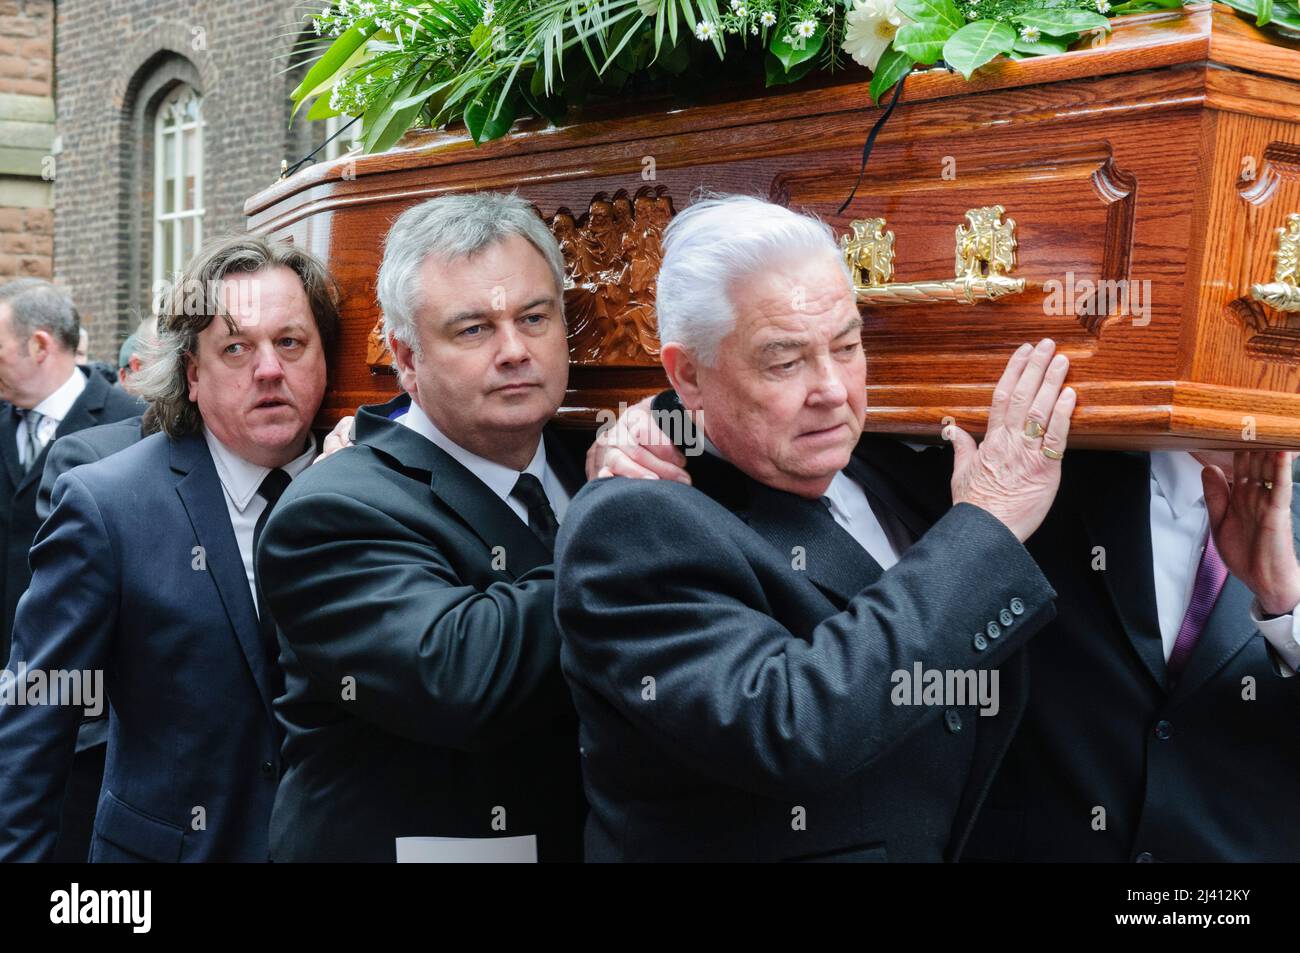 Belfast, Northern Ireland. 3rd March 2011.  Eamonn Holmes helps carry the coffin at the Funeral of Belfast Comedian Frank Carson. Stock Photo